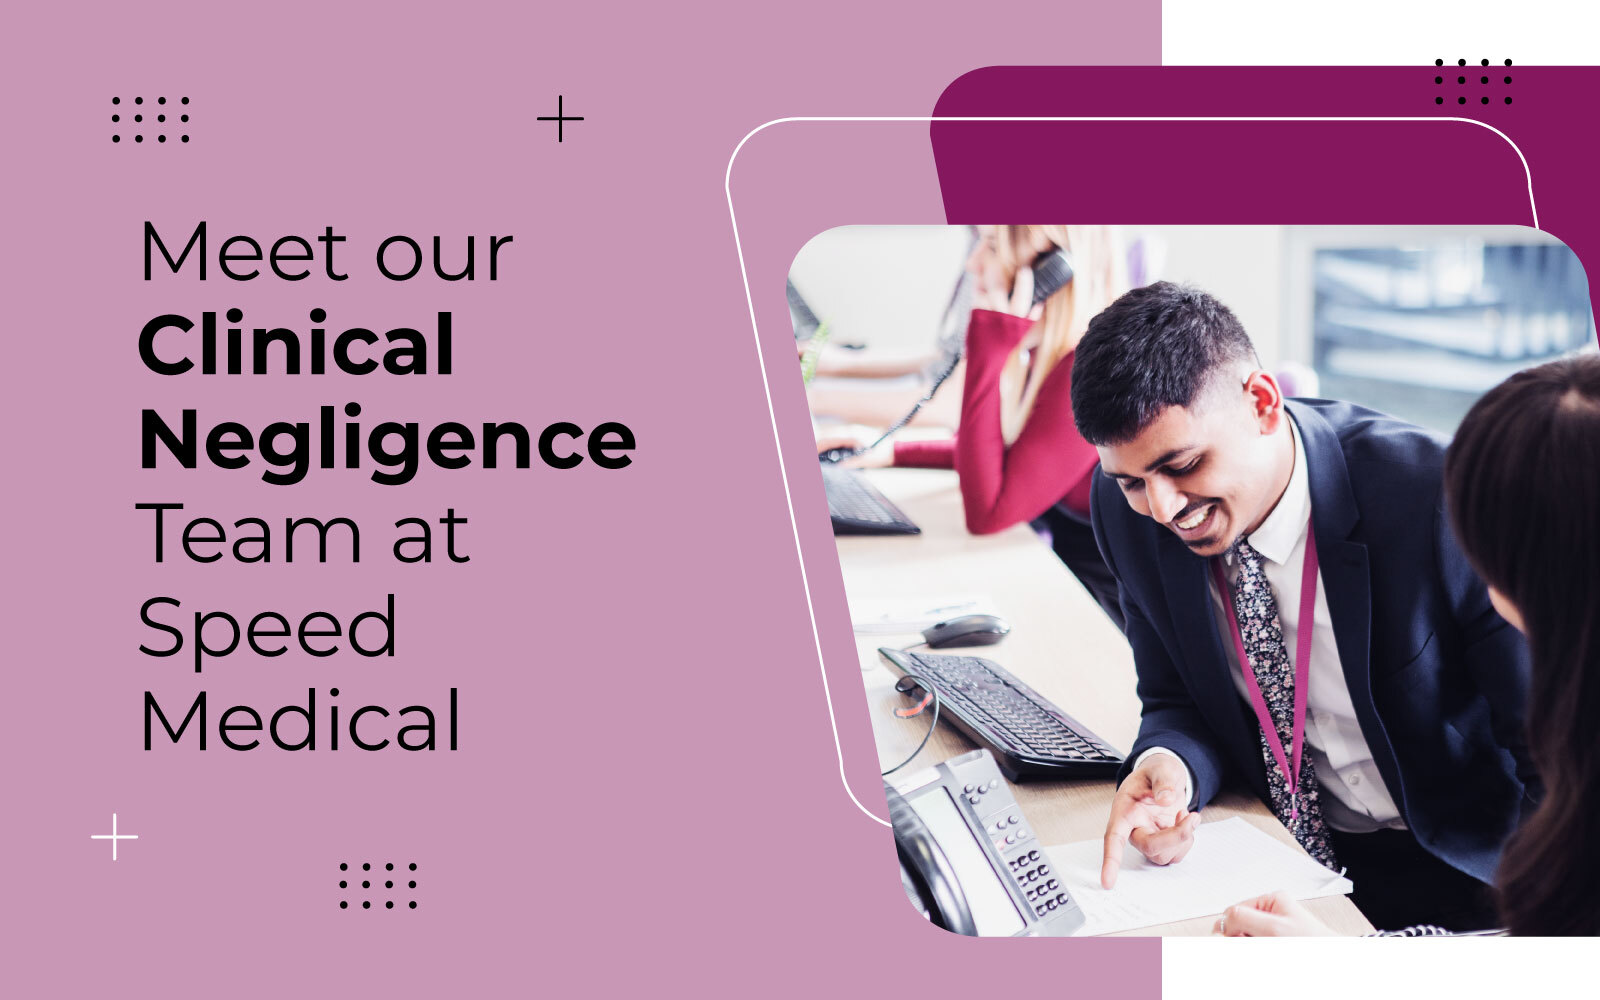 Meet the Clinical Negligence Team at Speed Medical